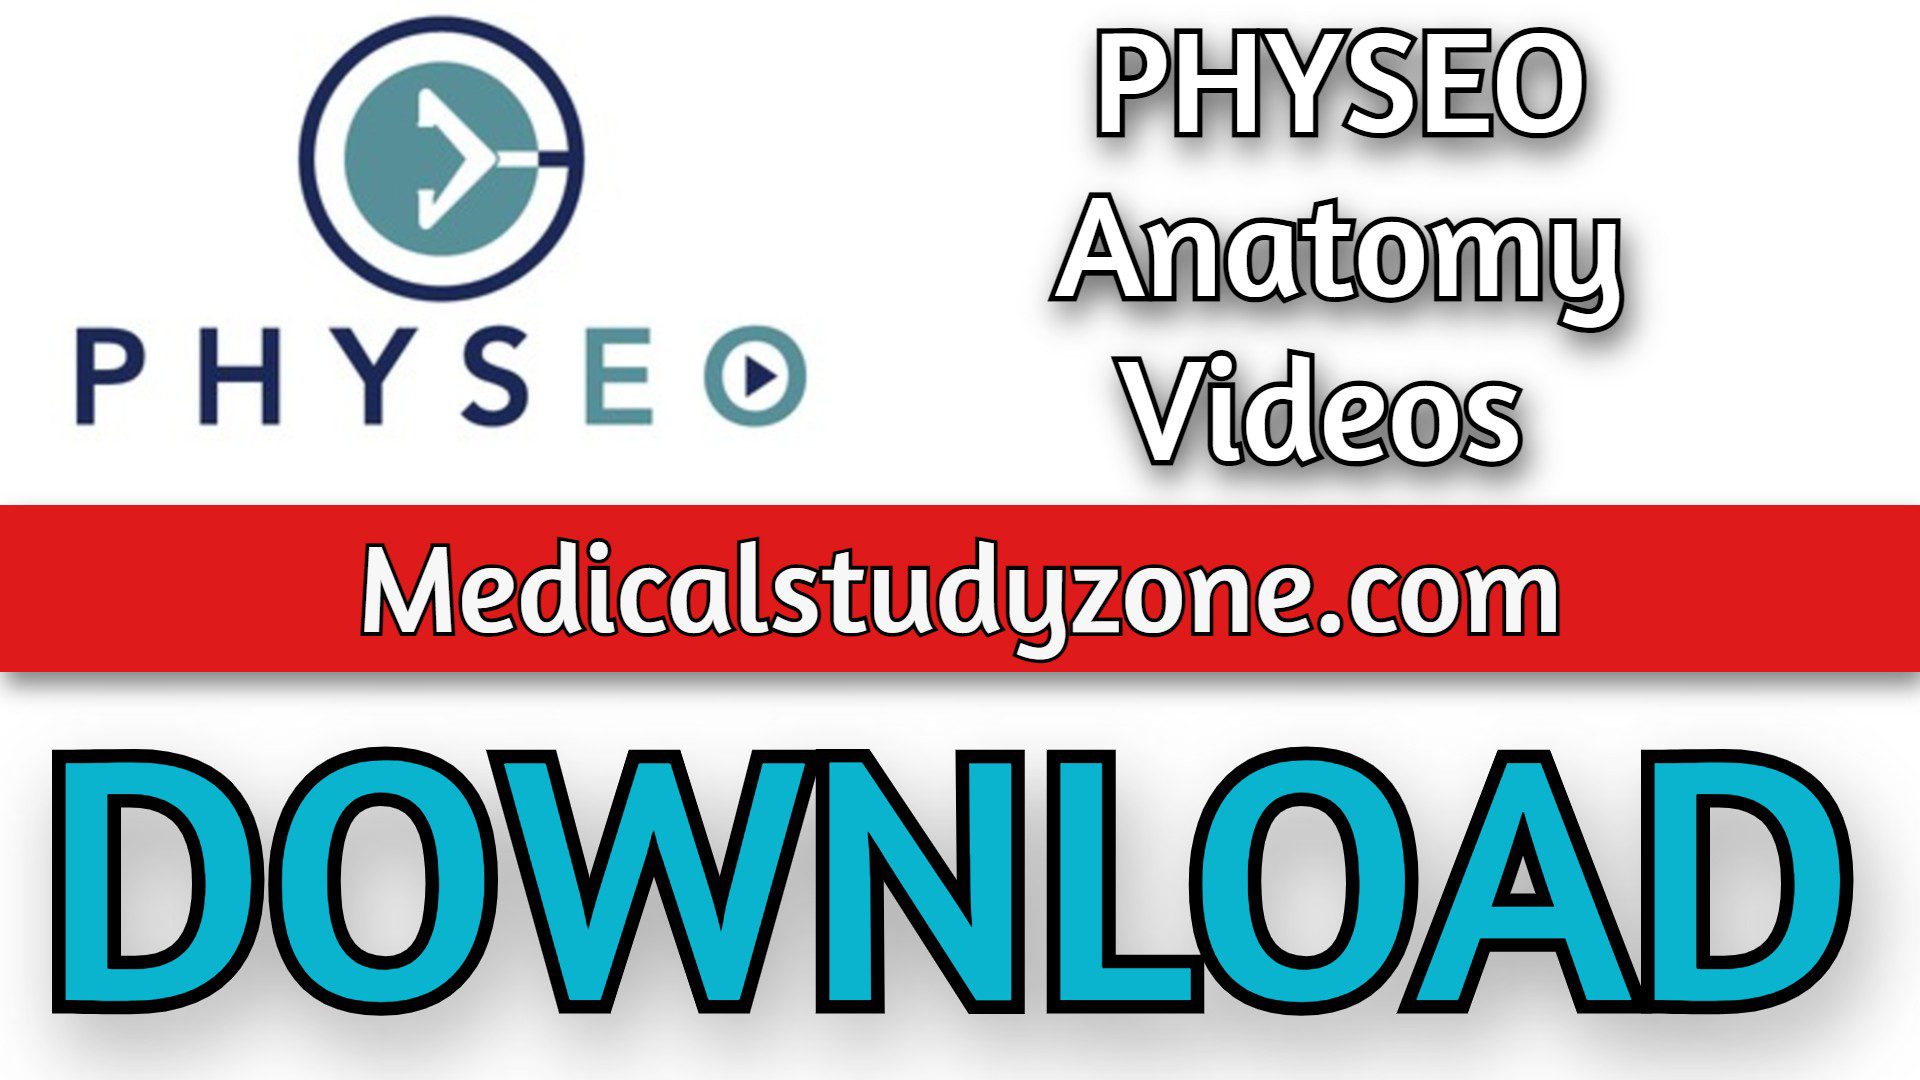 PHYSEO Anatomy Videos 2023 Free Download